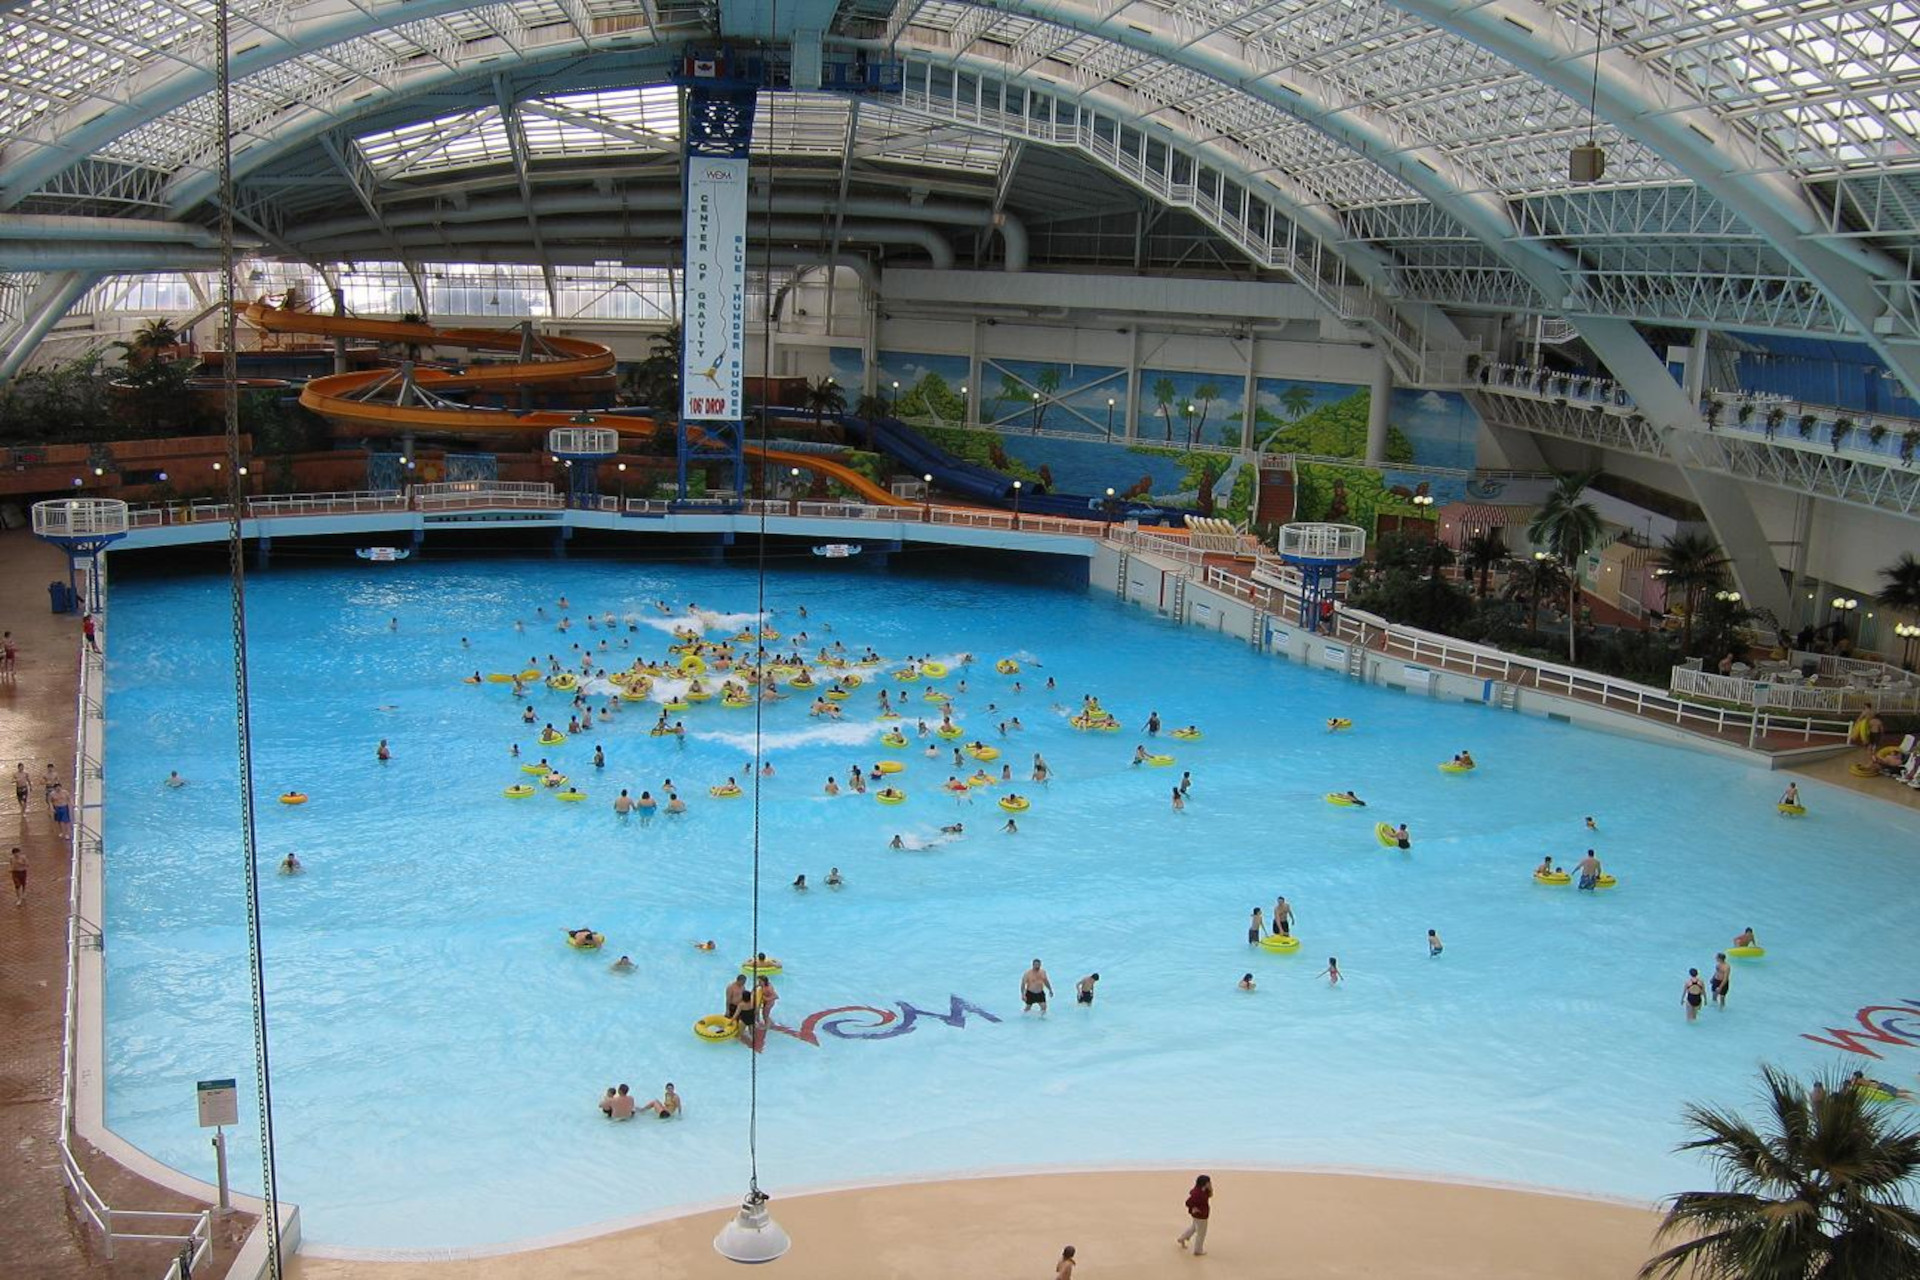 Children and adults enjoying in World Waterpark of West Edmonton.